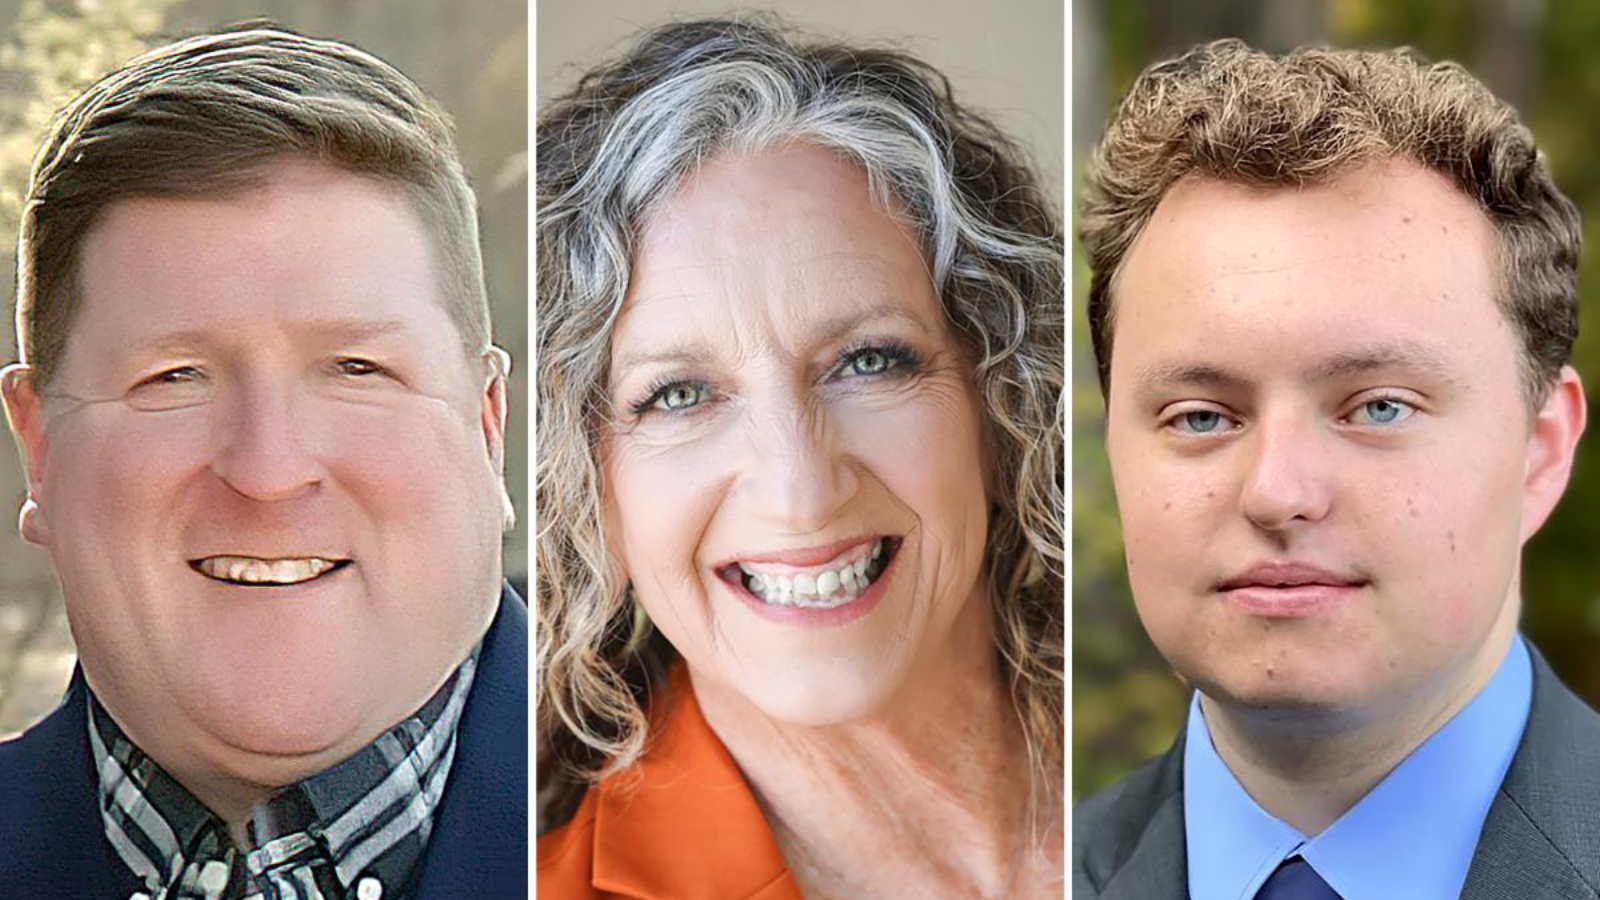 Which Democrat will win rural votes for an open Assembly seat in District 40?